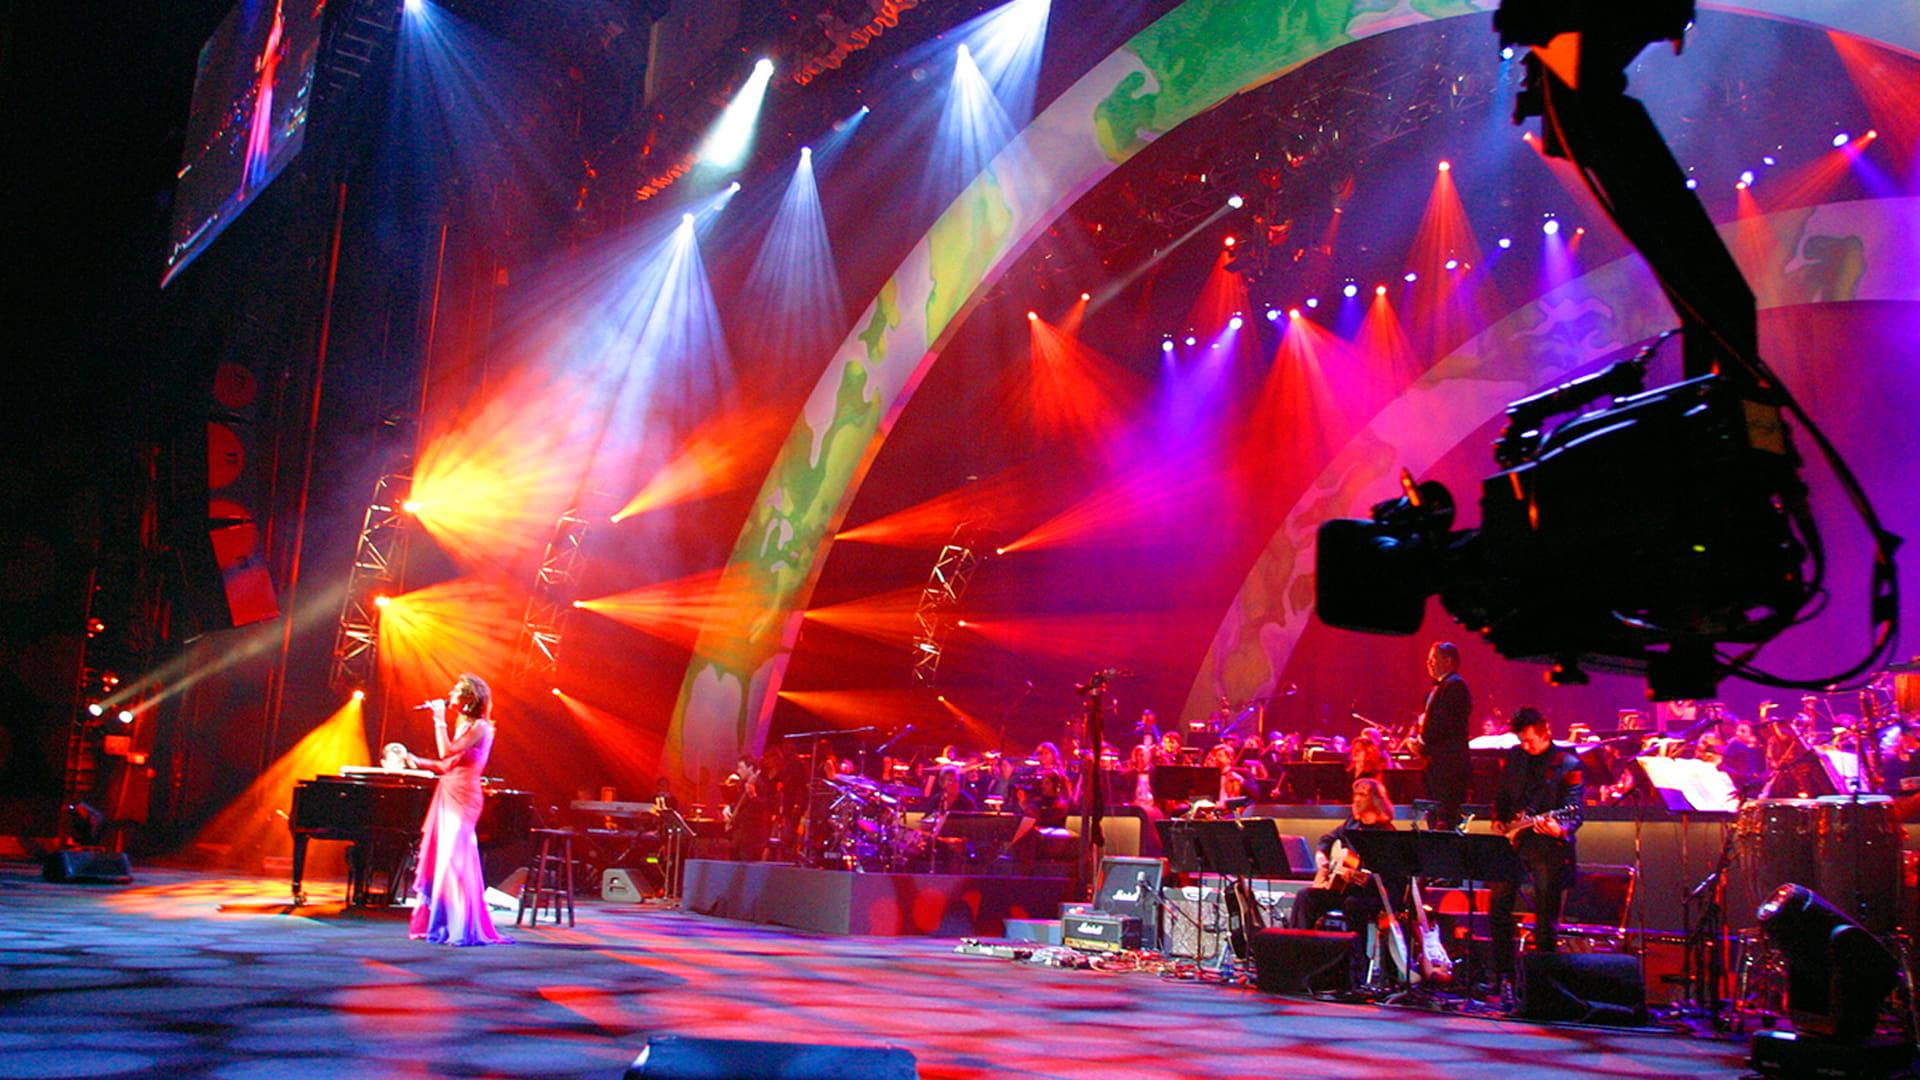 The Concert For World Children's Day backdrop